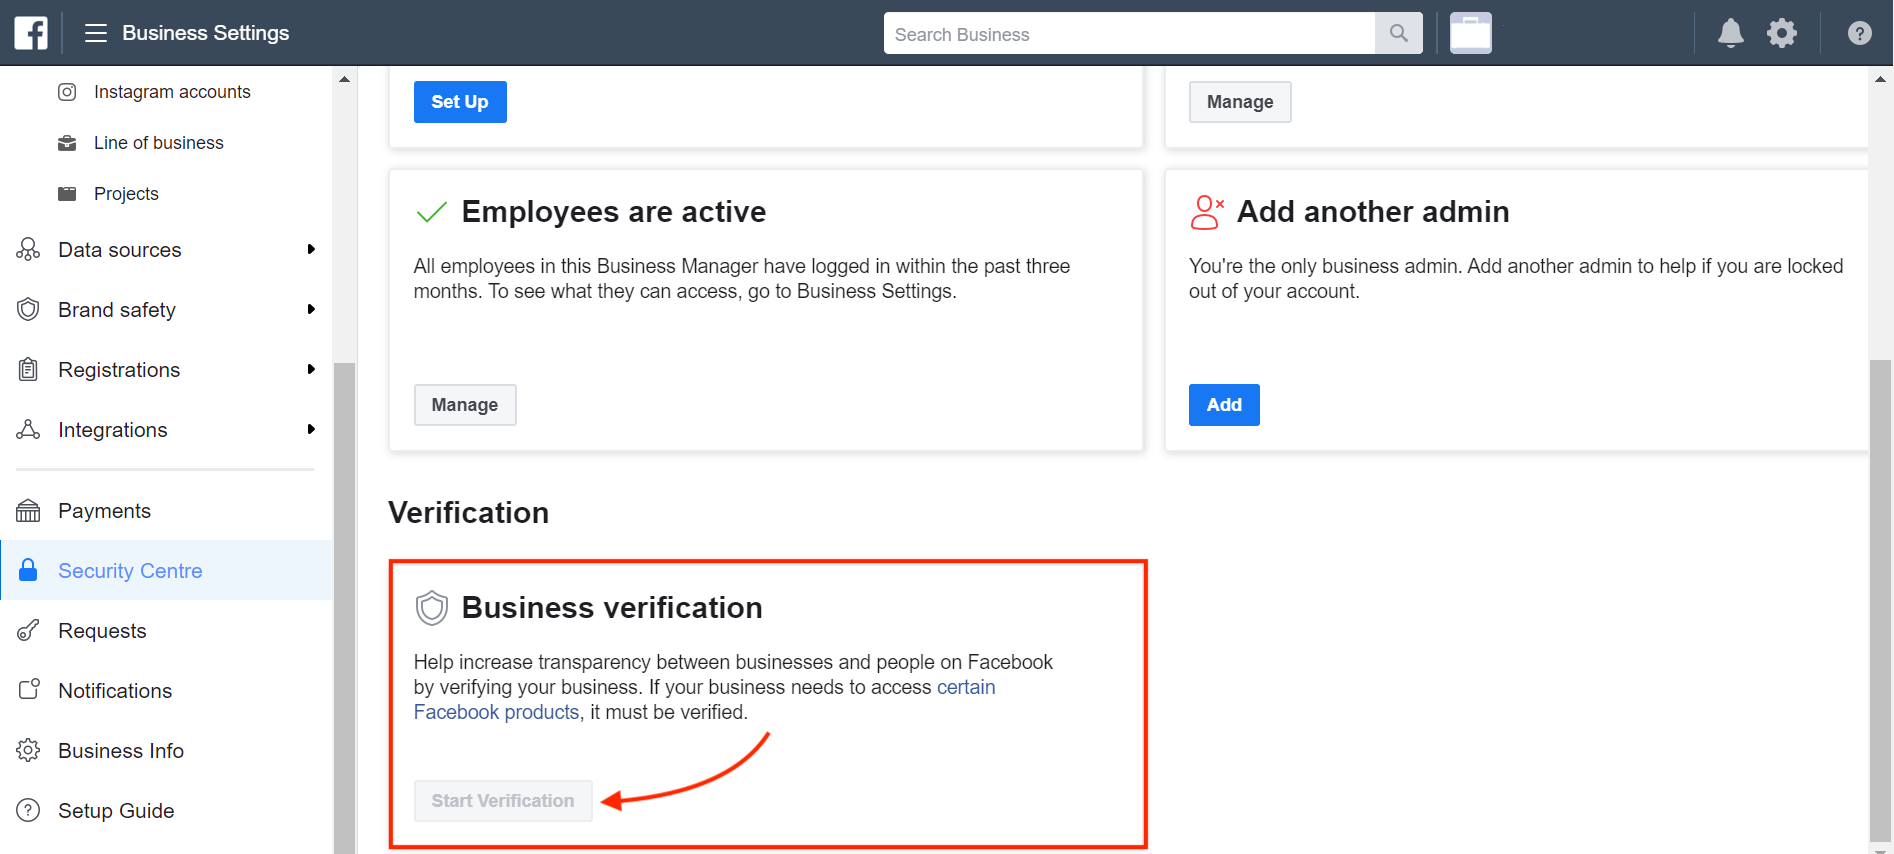 What should I do if my Business Verification button is Greyed out?